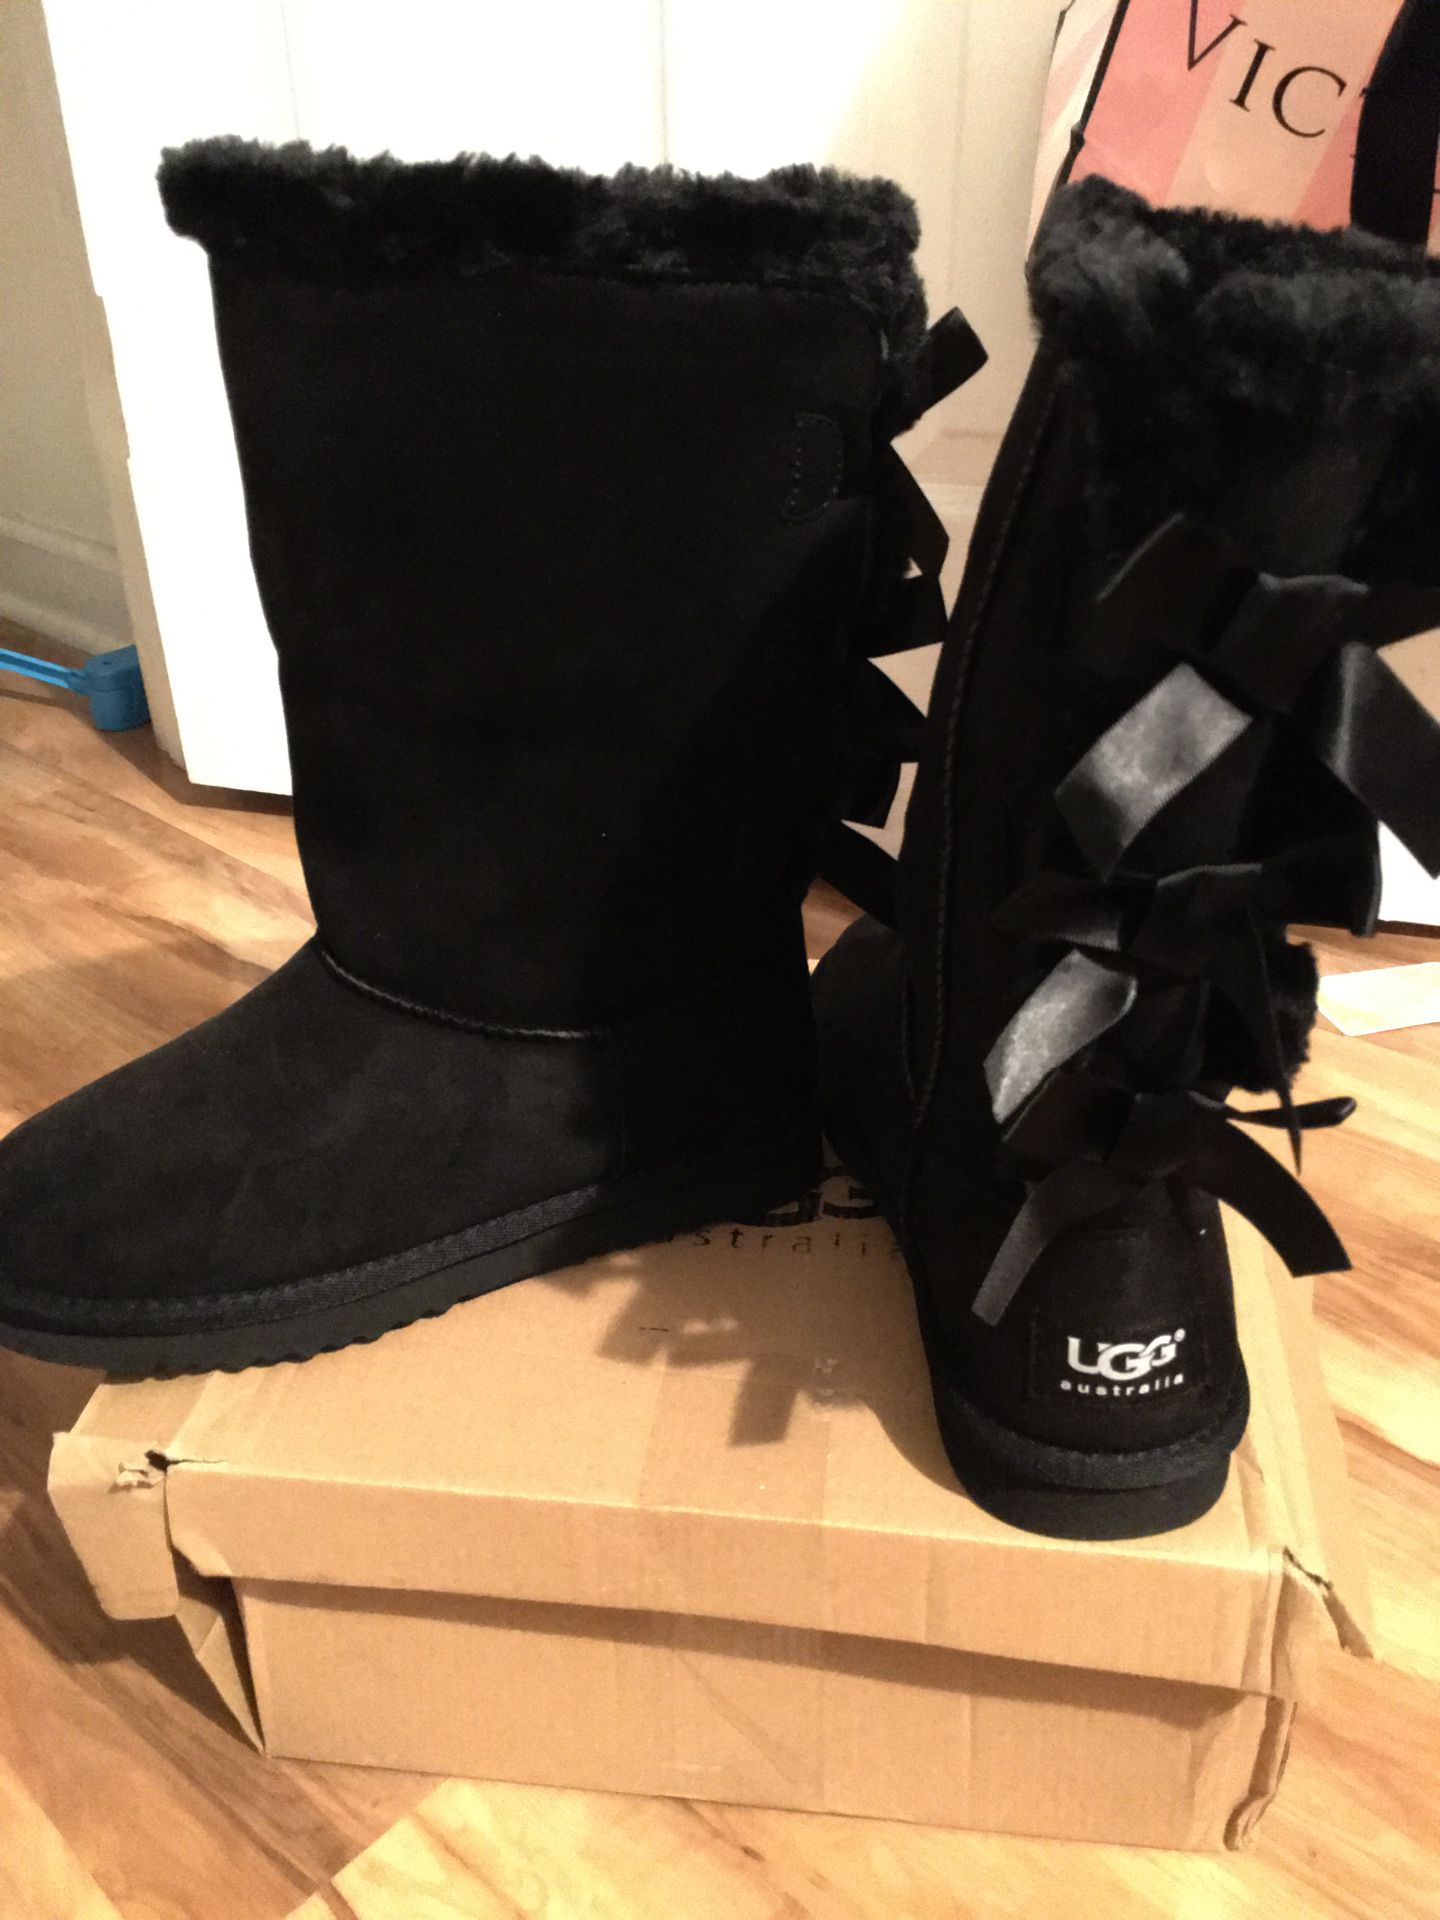 Ugg’s winter boots